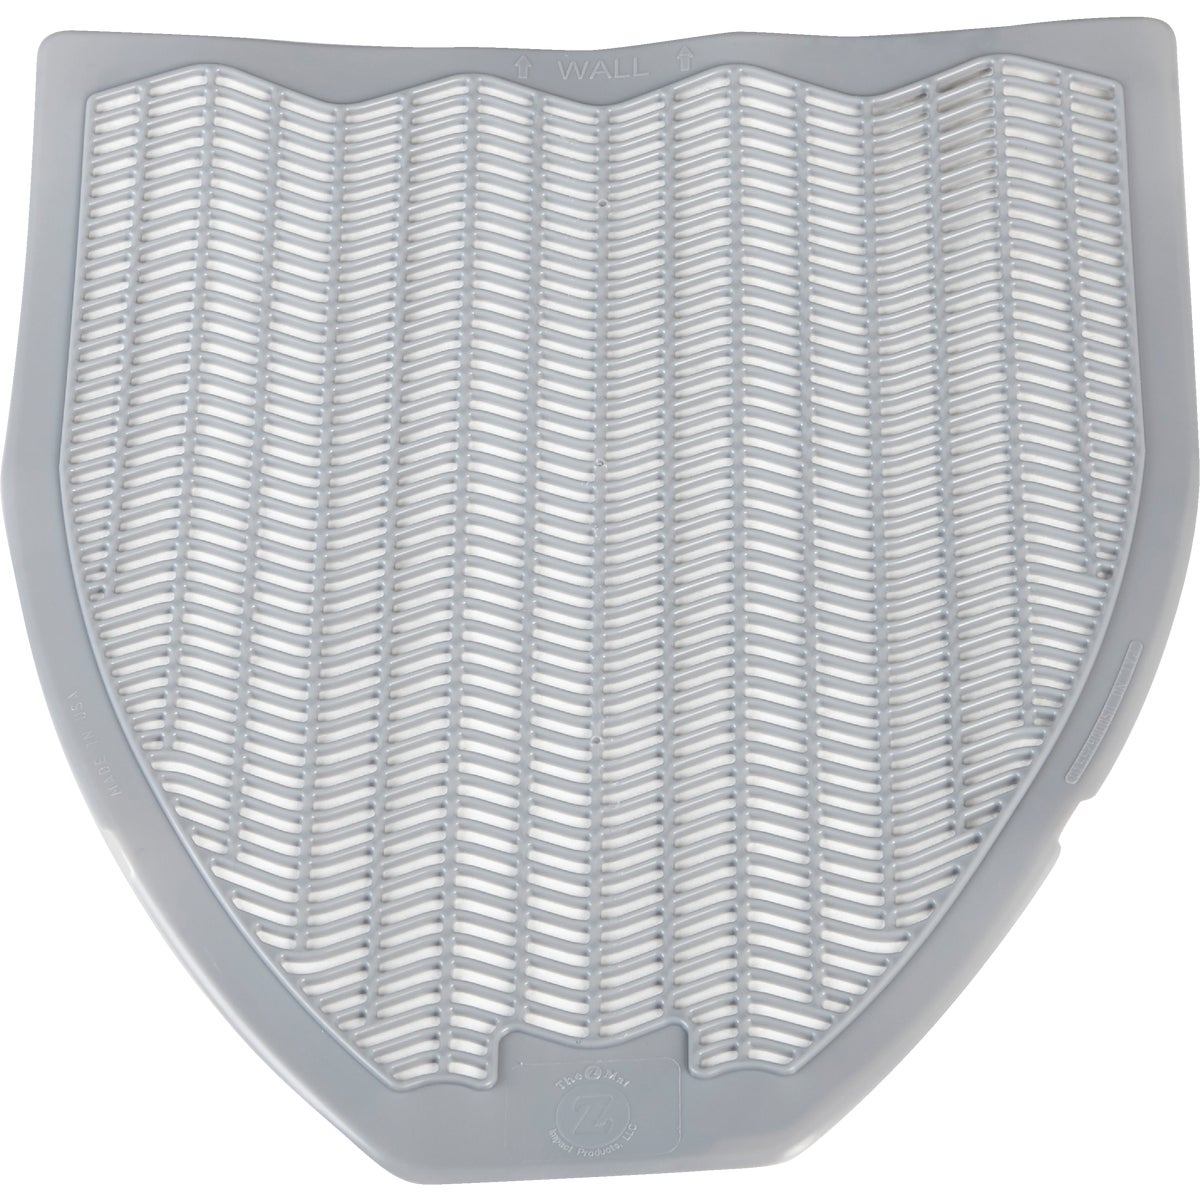 Impact Orchard Zing Scent 6-Week Protection Urinal Mat